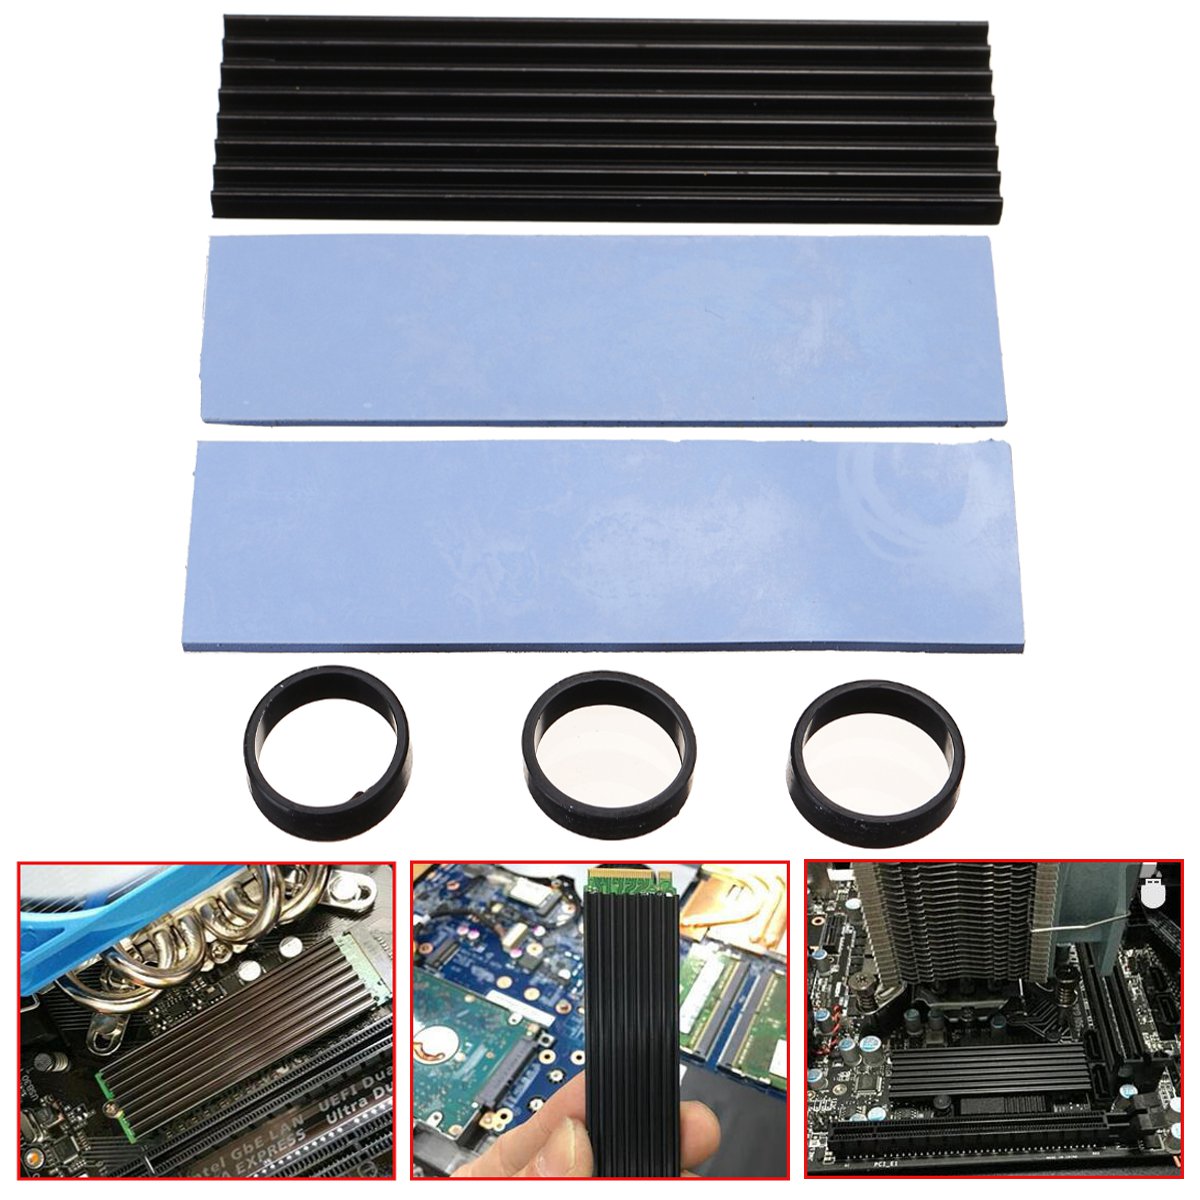 

Aluminum Cooling Heat Sink Thermal Pad Black For SM961 960PRO M.2 NGFF NVMe 2280